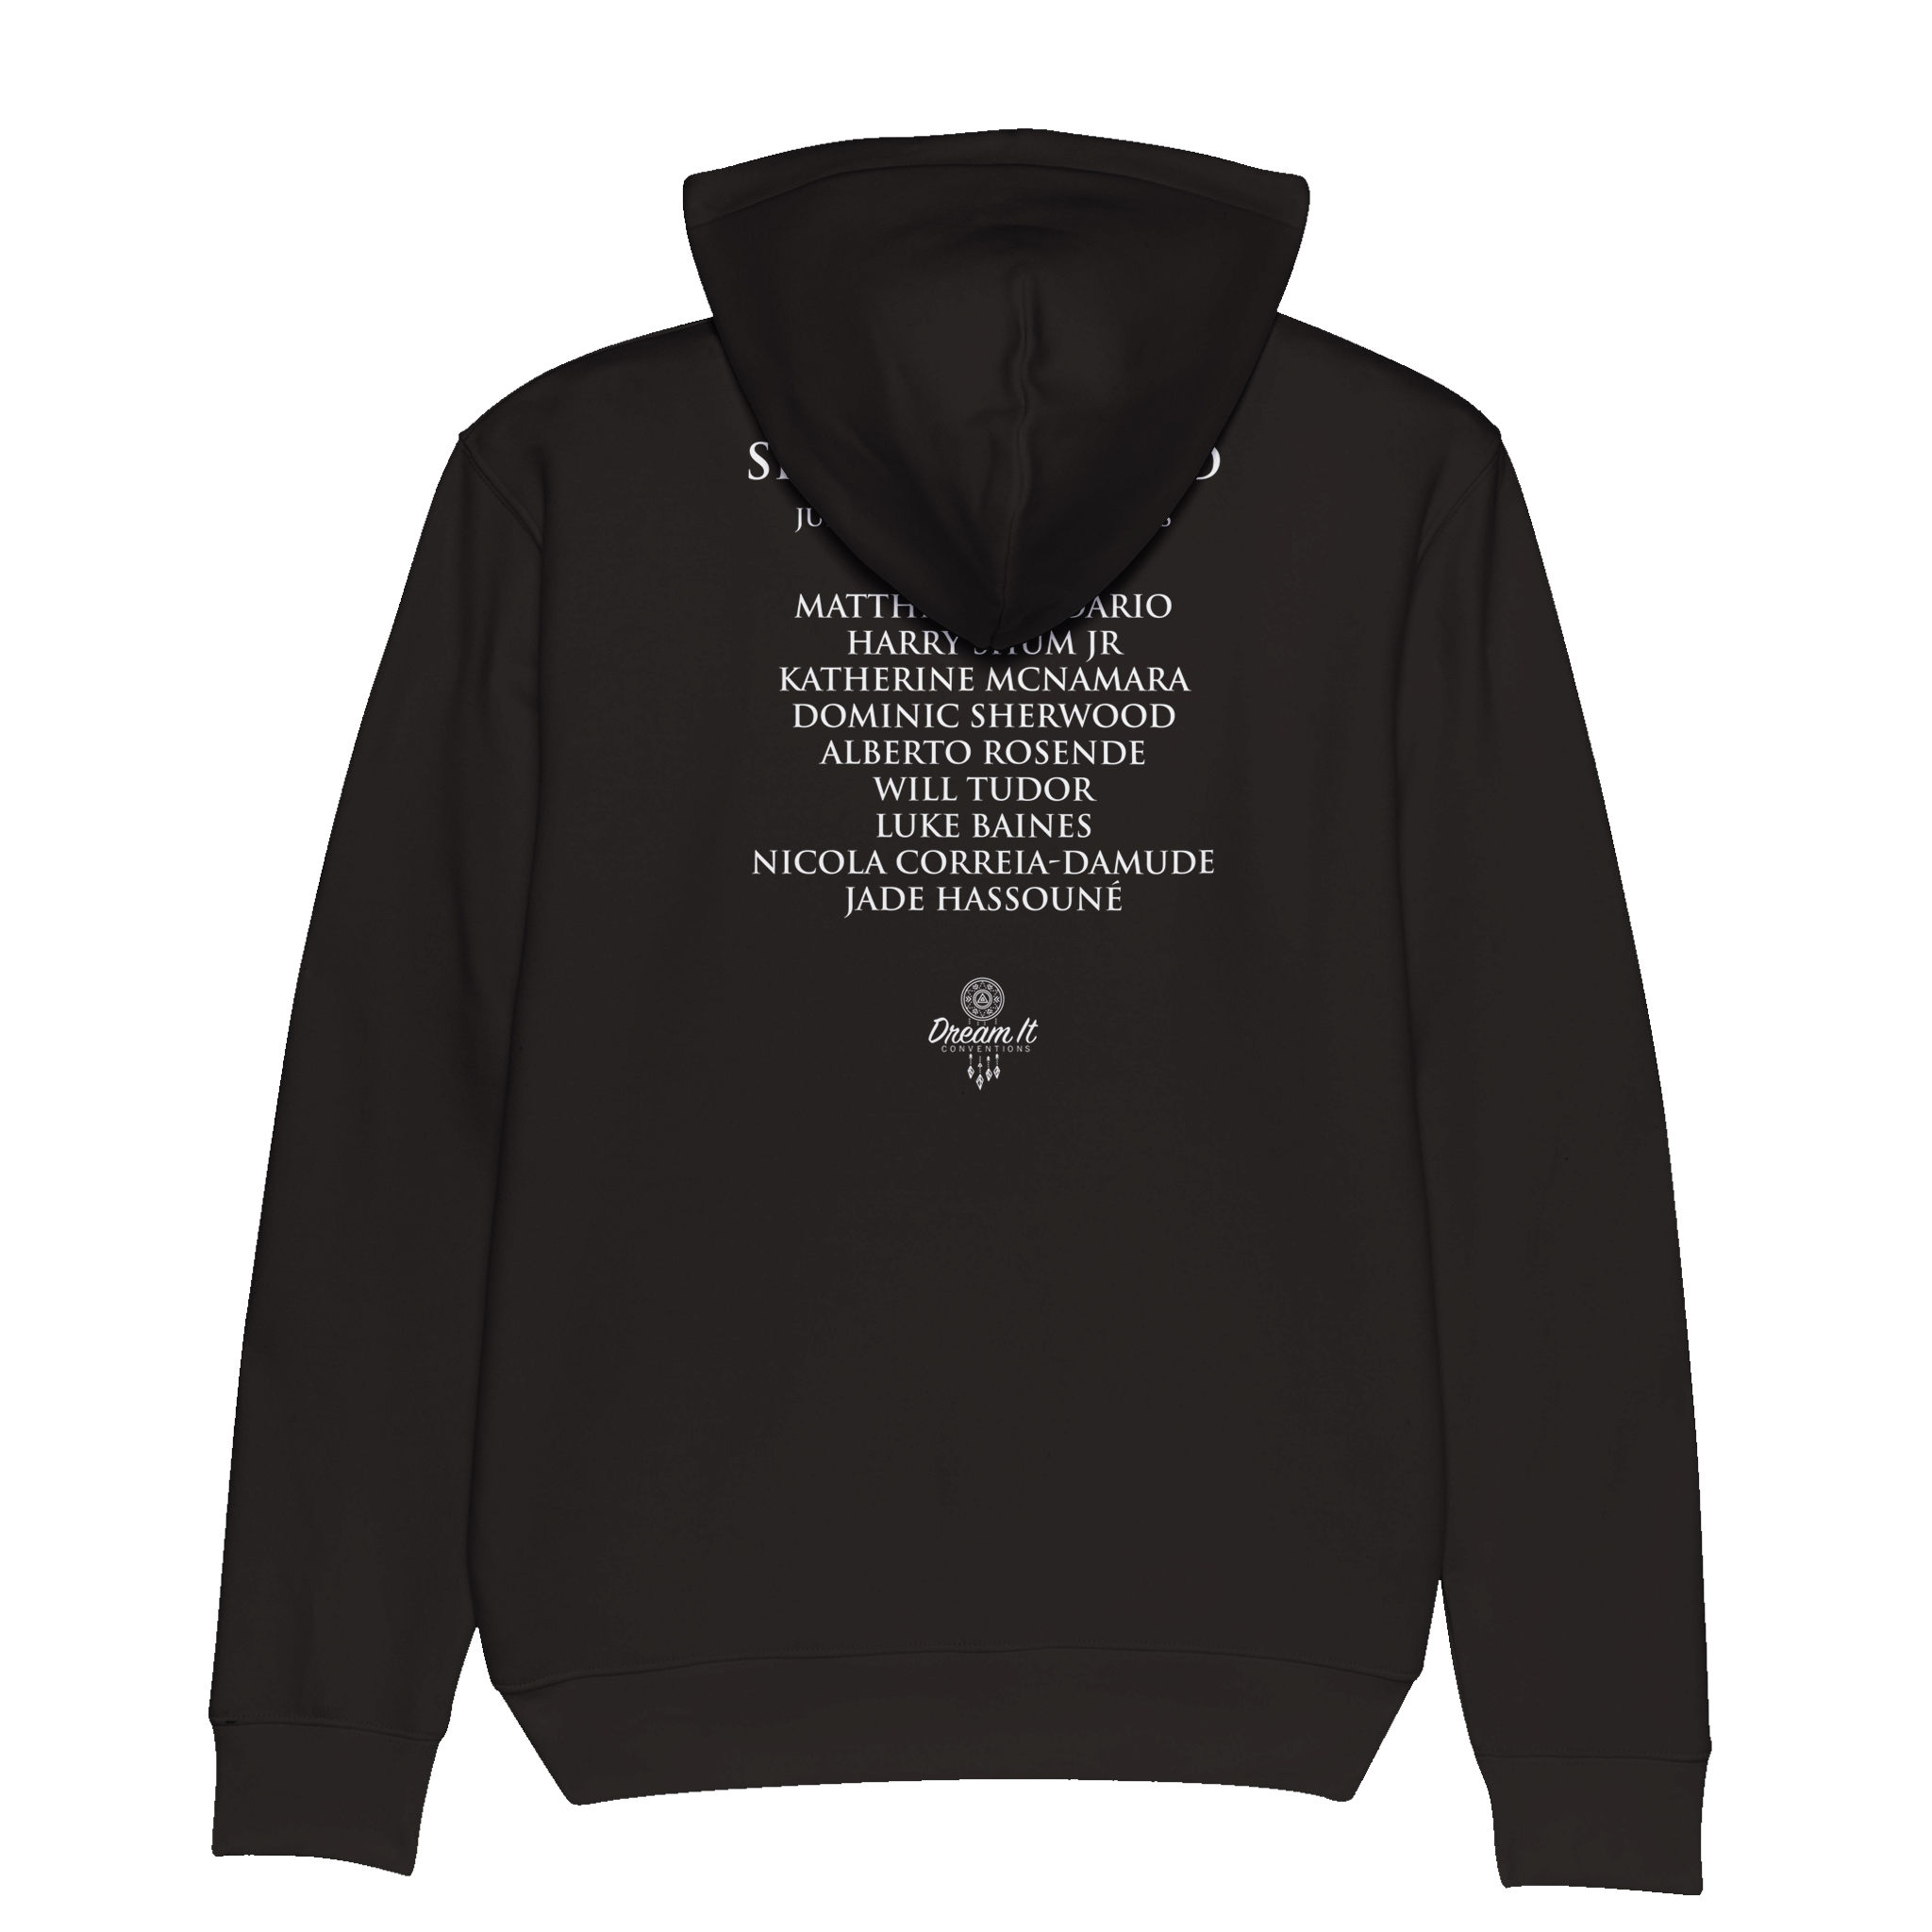 ENTER THE SHADOW WORLD POSTER Organic Unisex Hoodie